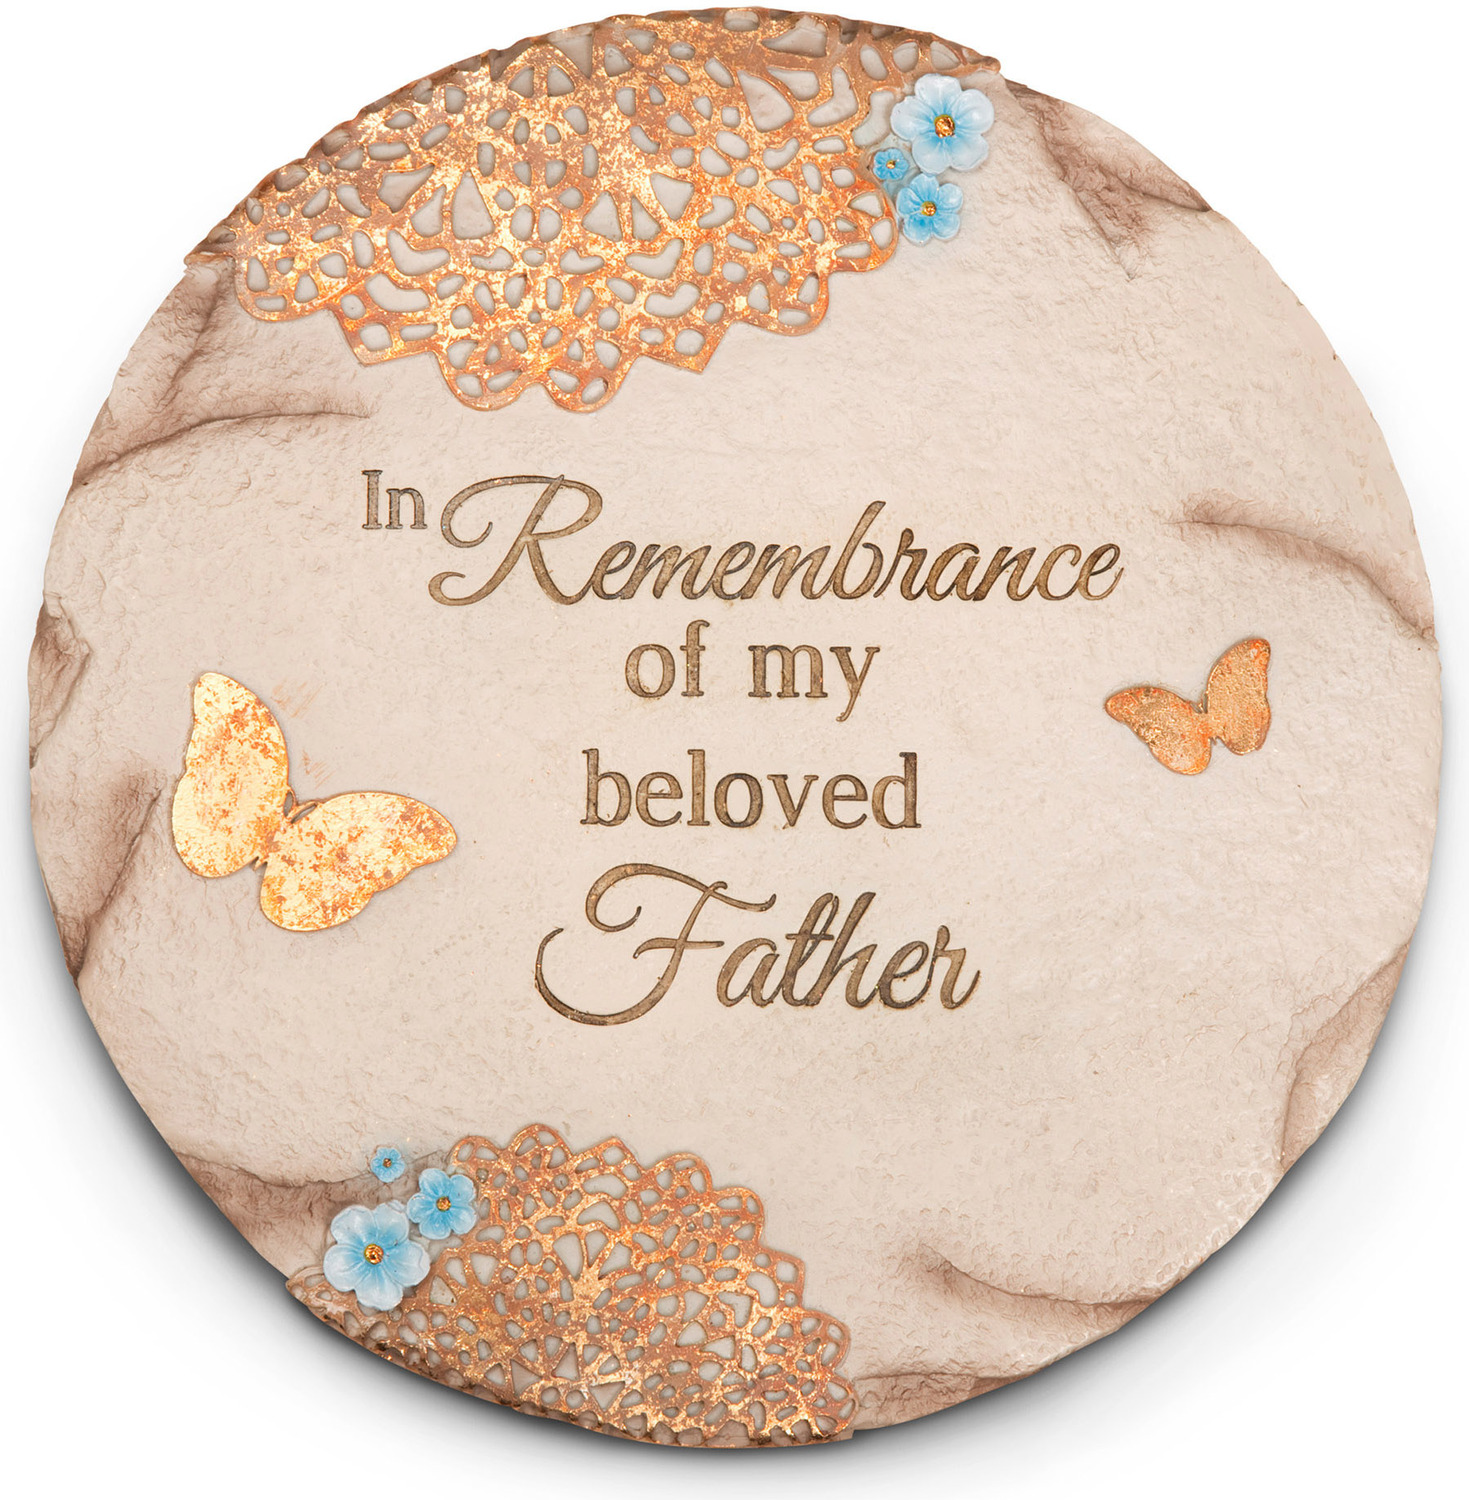 Beloved Father by Light Your Way Memorial - <em>Father</em> - Large Memorial Stone -